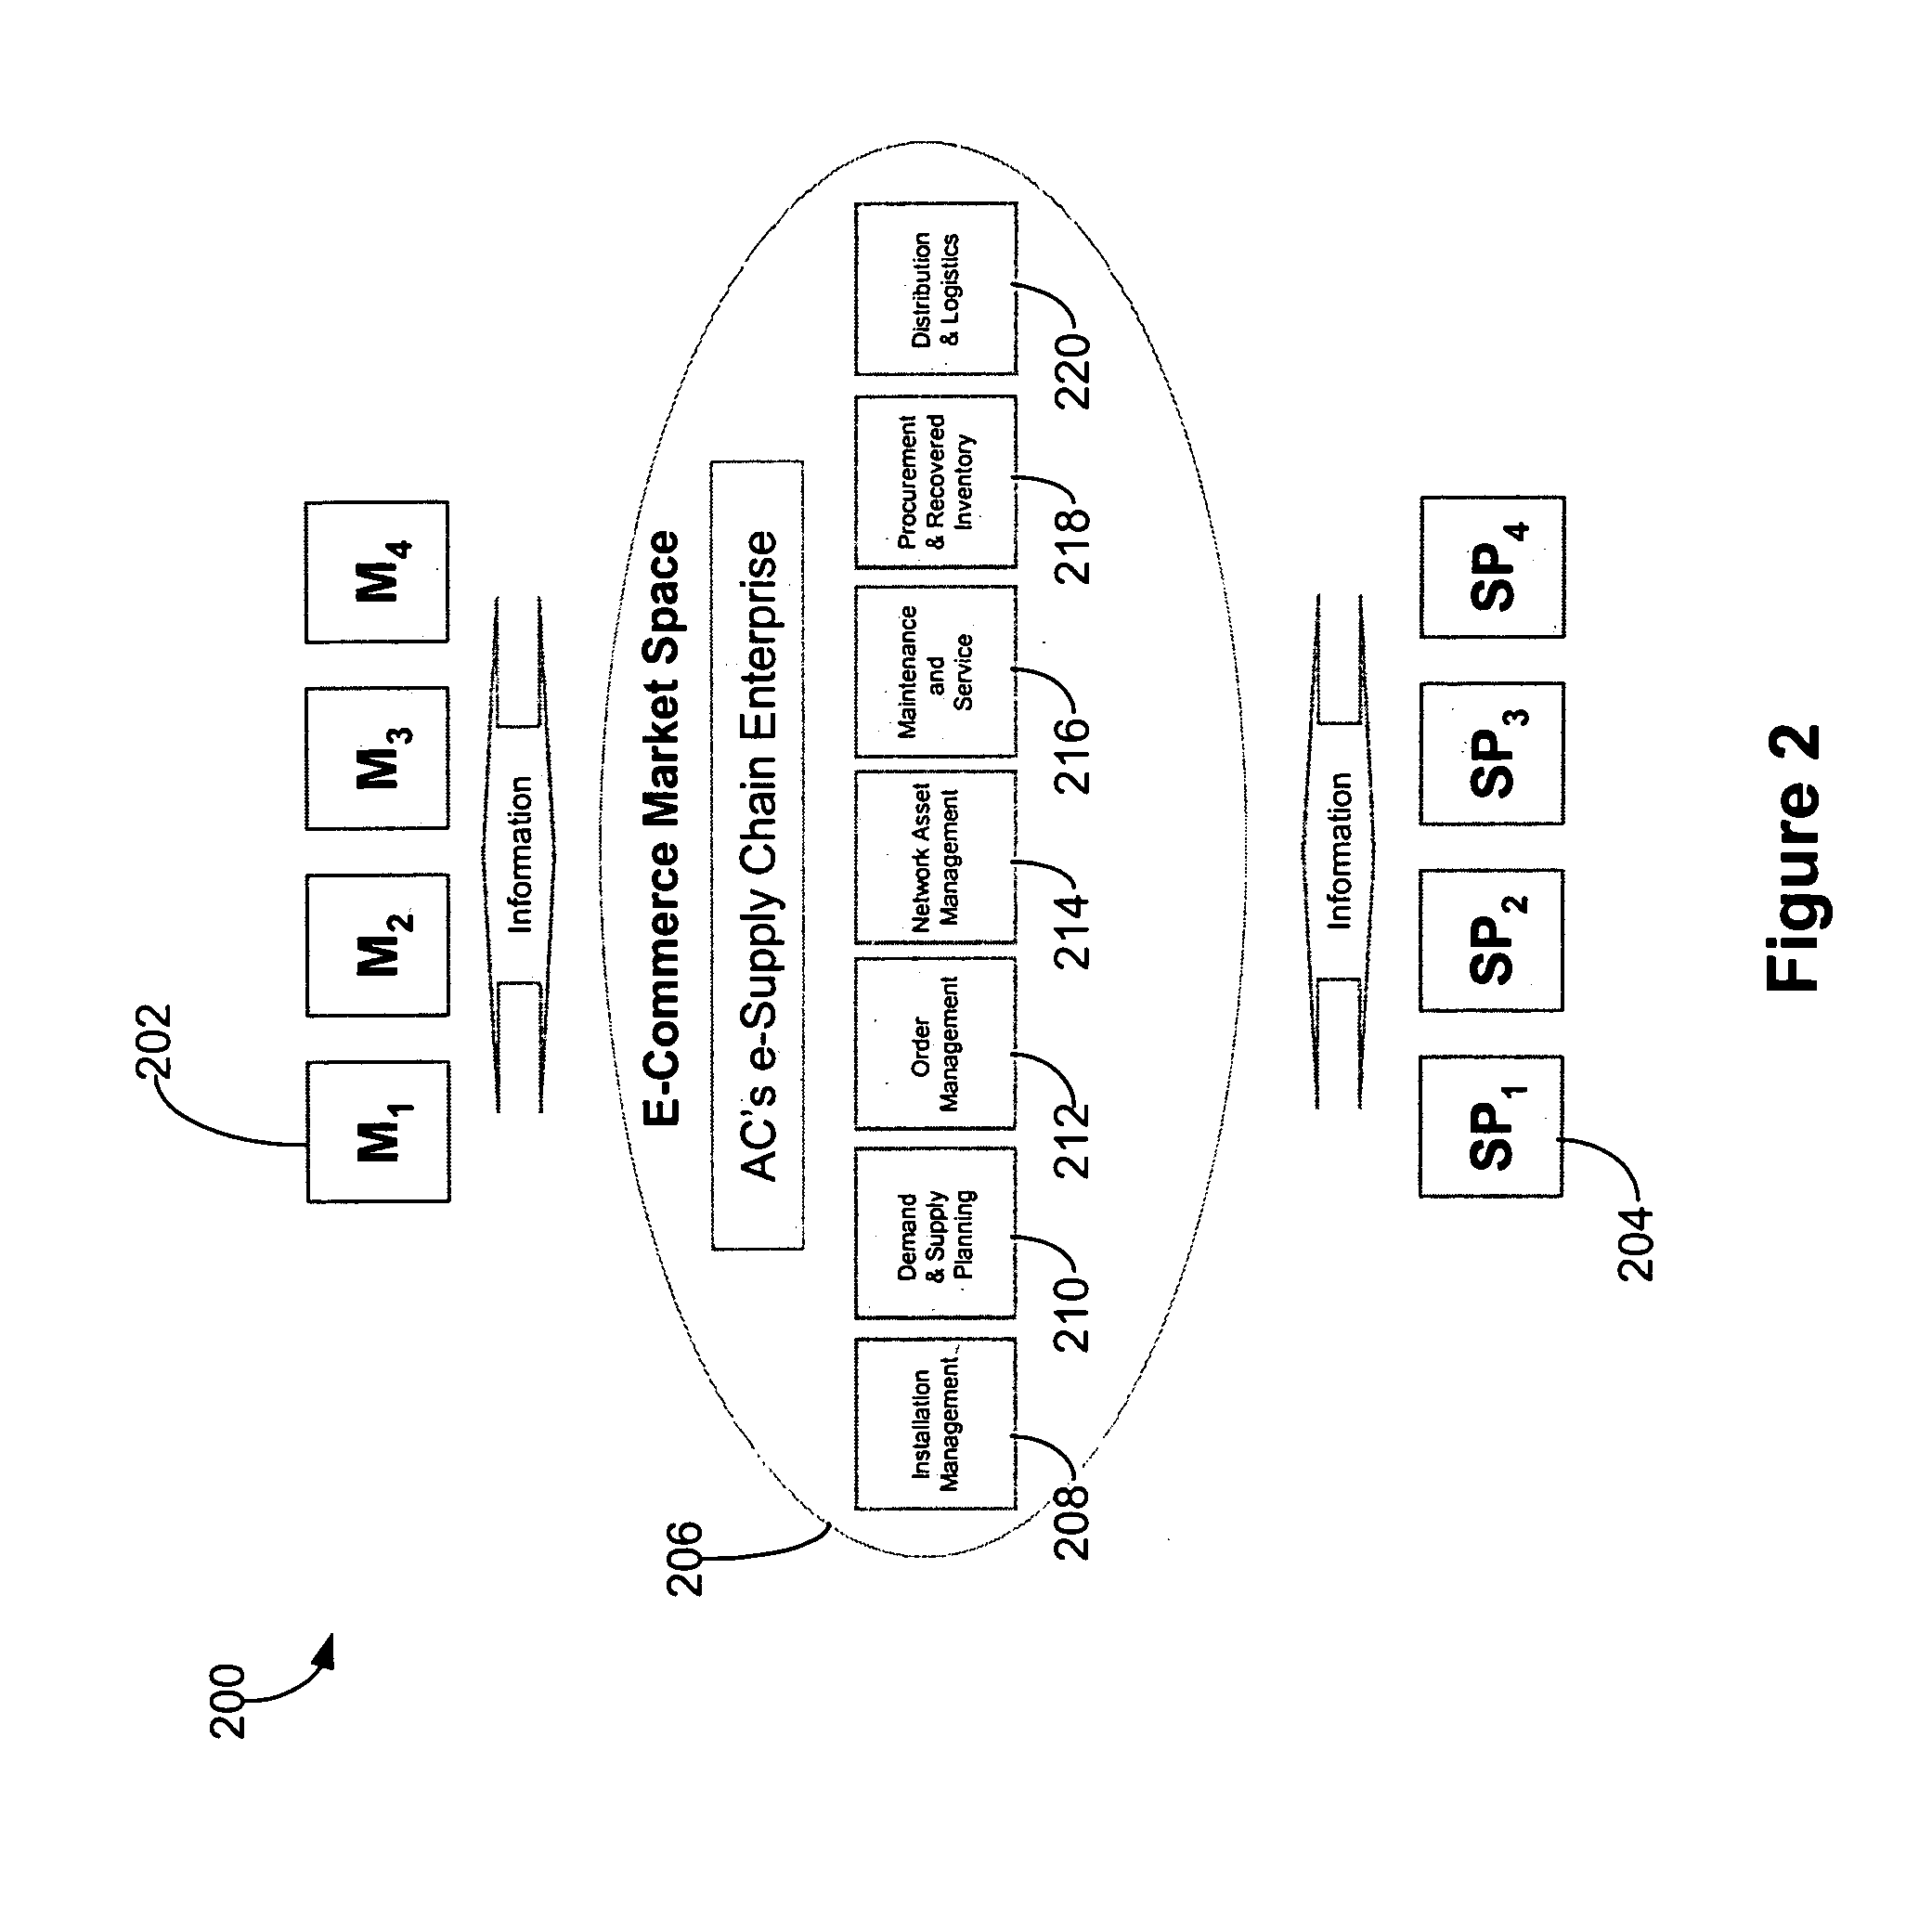 Scheduling and planning maintenance and service in a network-based supply chain environment